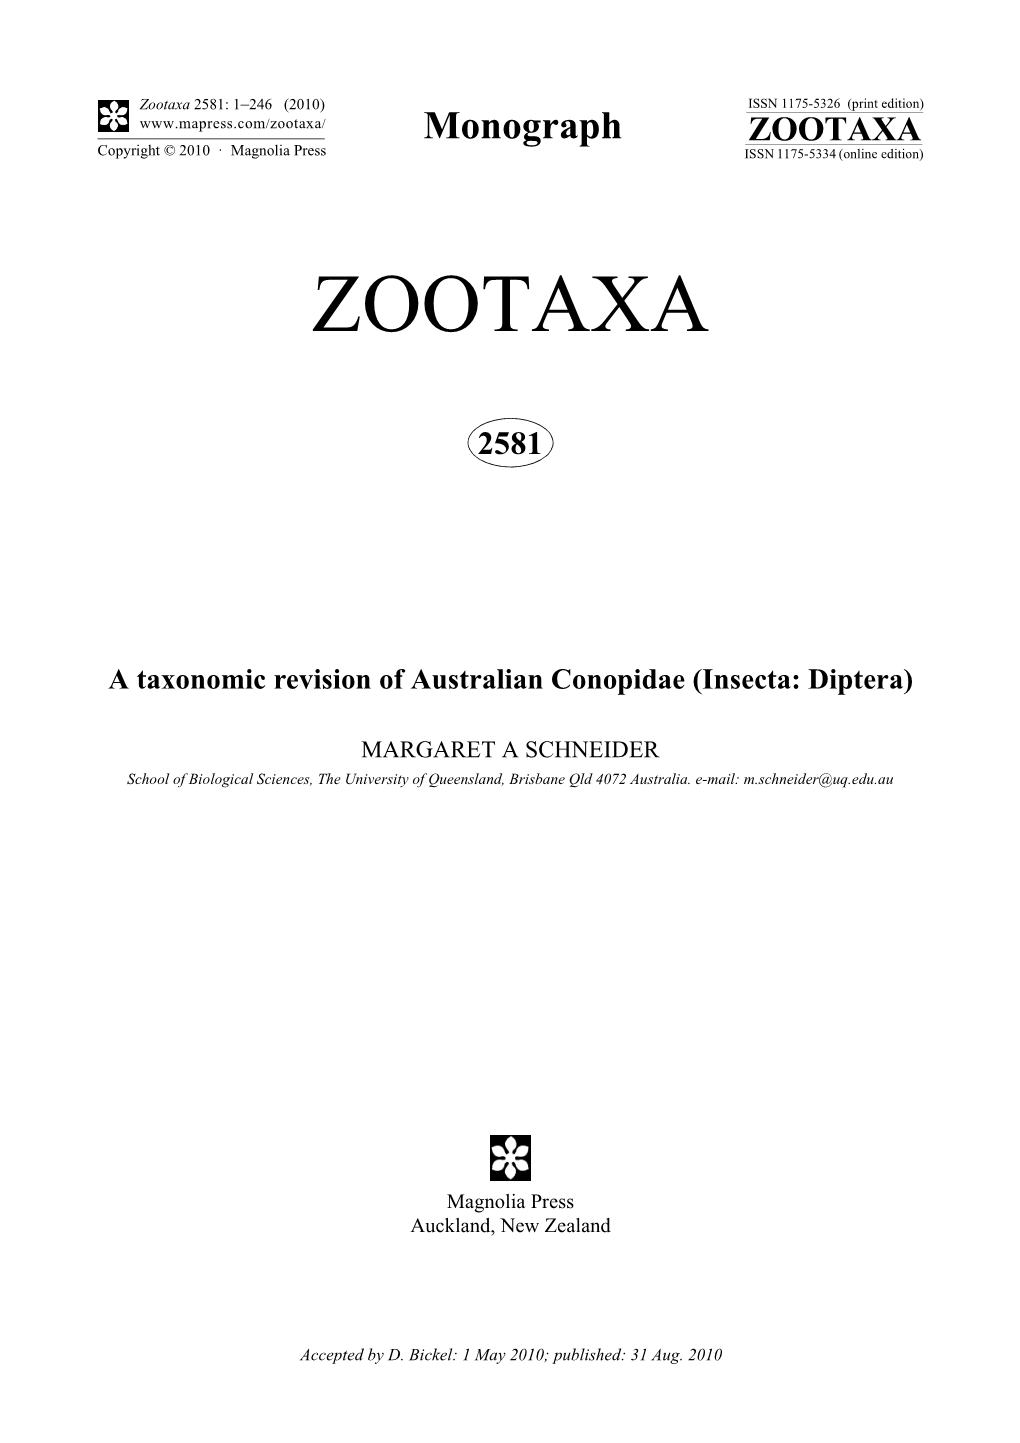 Zootaxa, a Taxonomic Revision of Australian Conopidae (Insecta